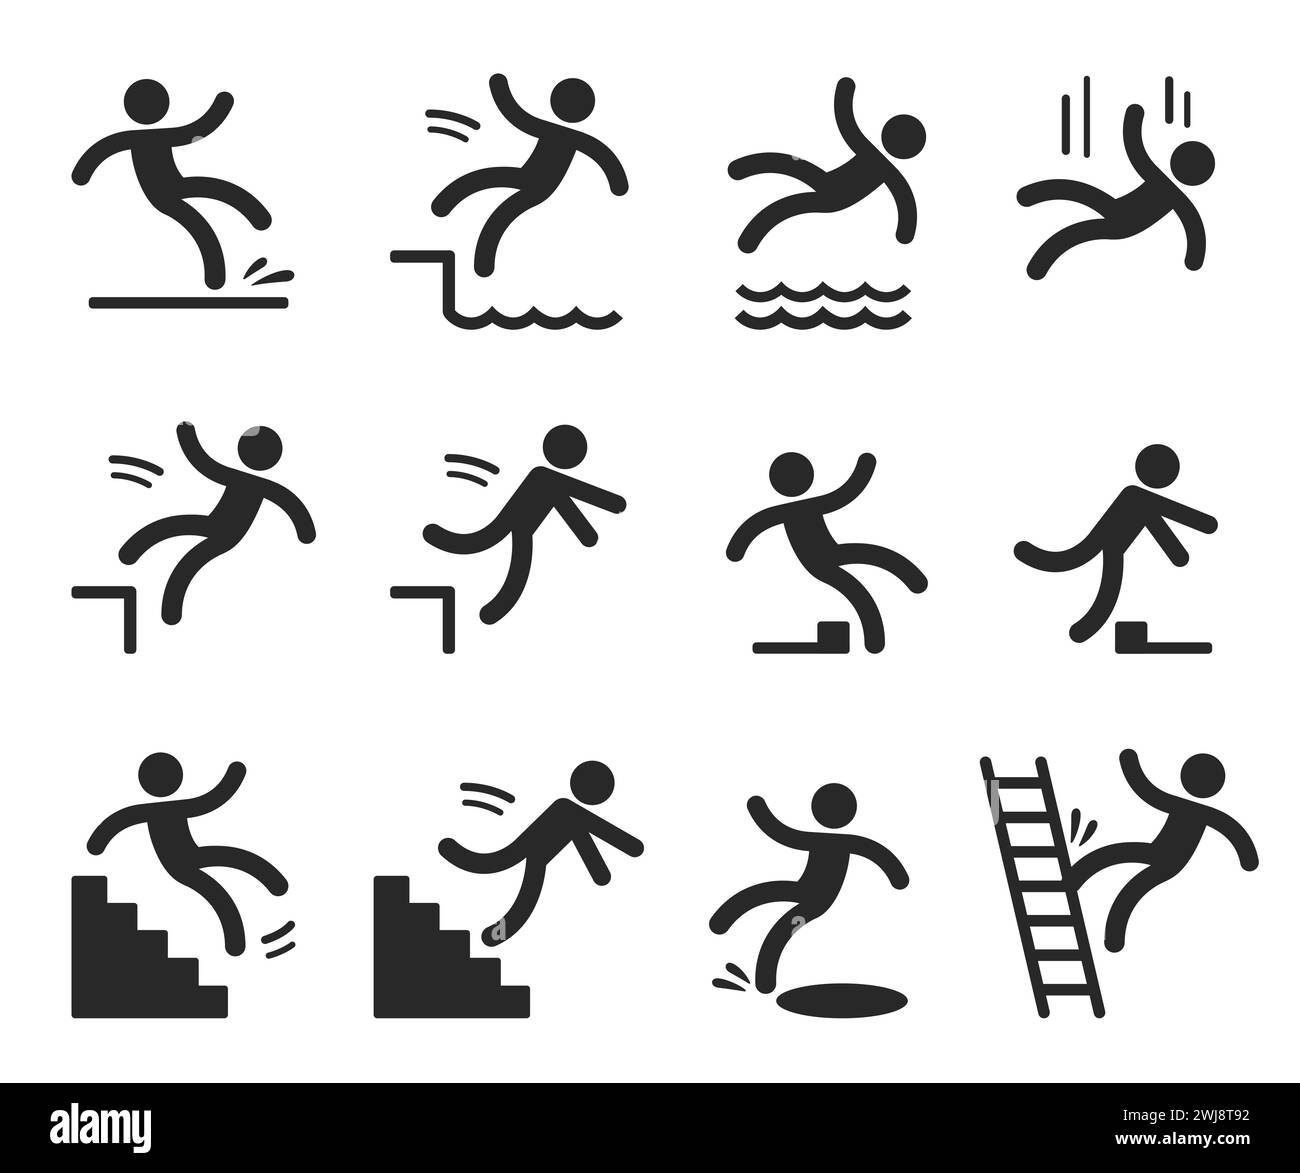 Caution symbols with stick figure man falling. Wet floor, tripping, falling from stairs, ladder, water, edge. Workplace safety and injury vector illus Stock Vector